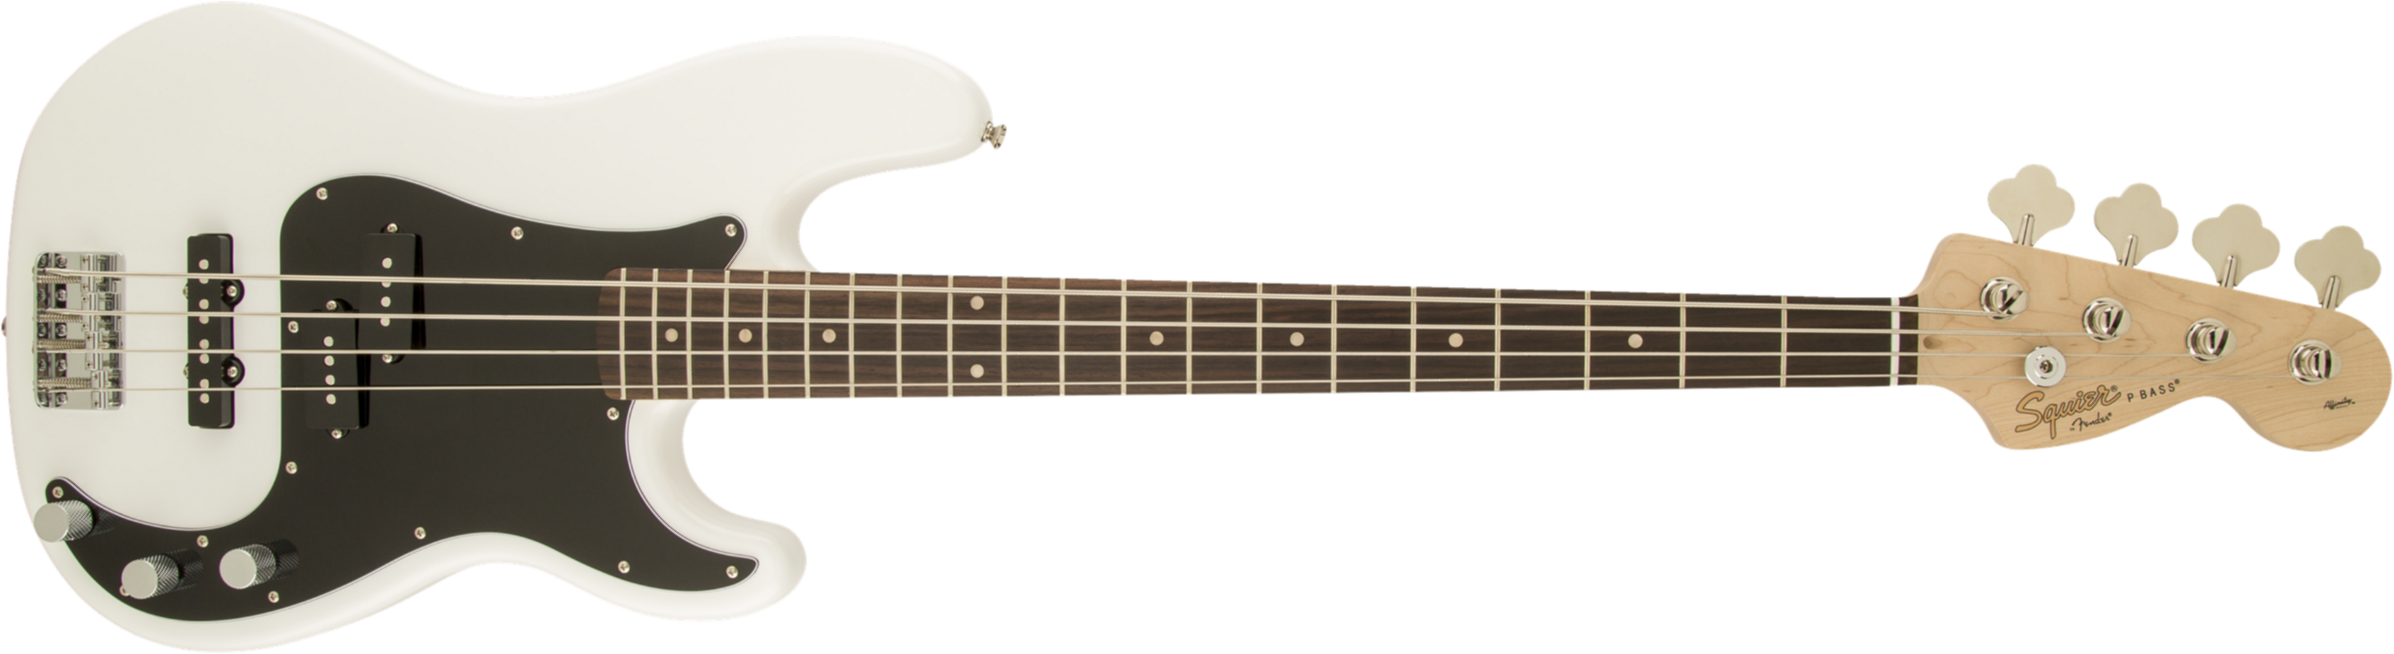 Squier Precision Bass Affinity Series Pj (lau) - Olympic White - Solid body electric bass - Main picture